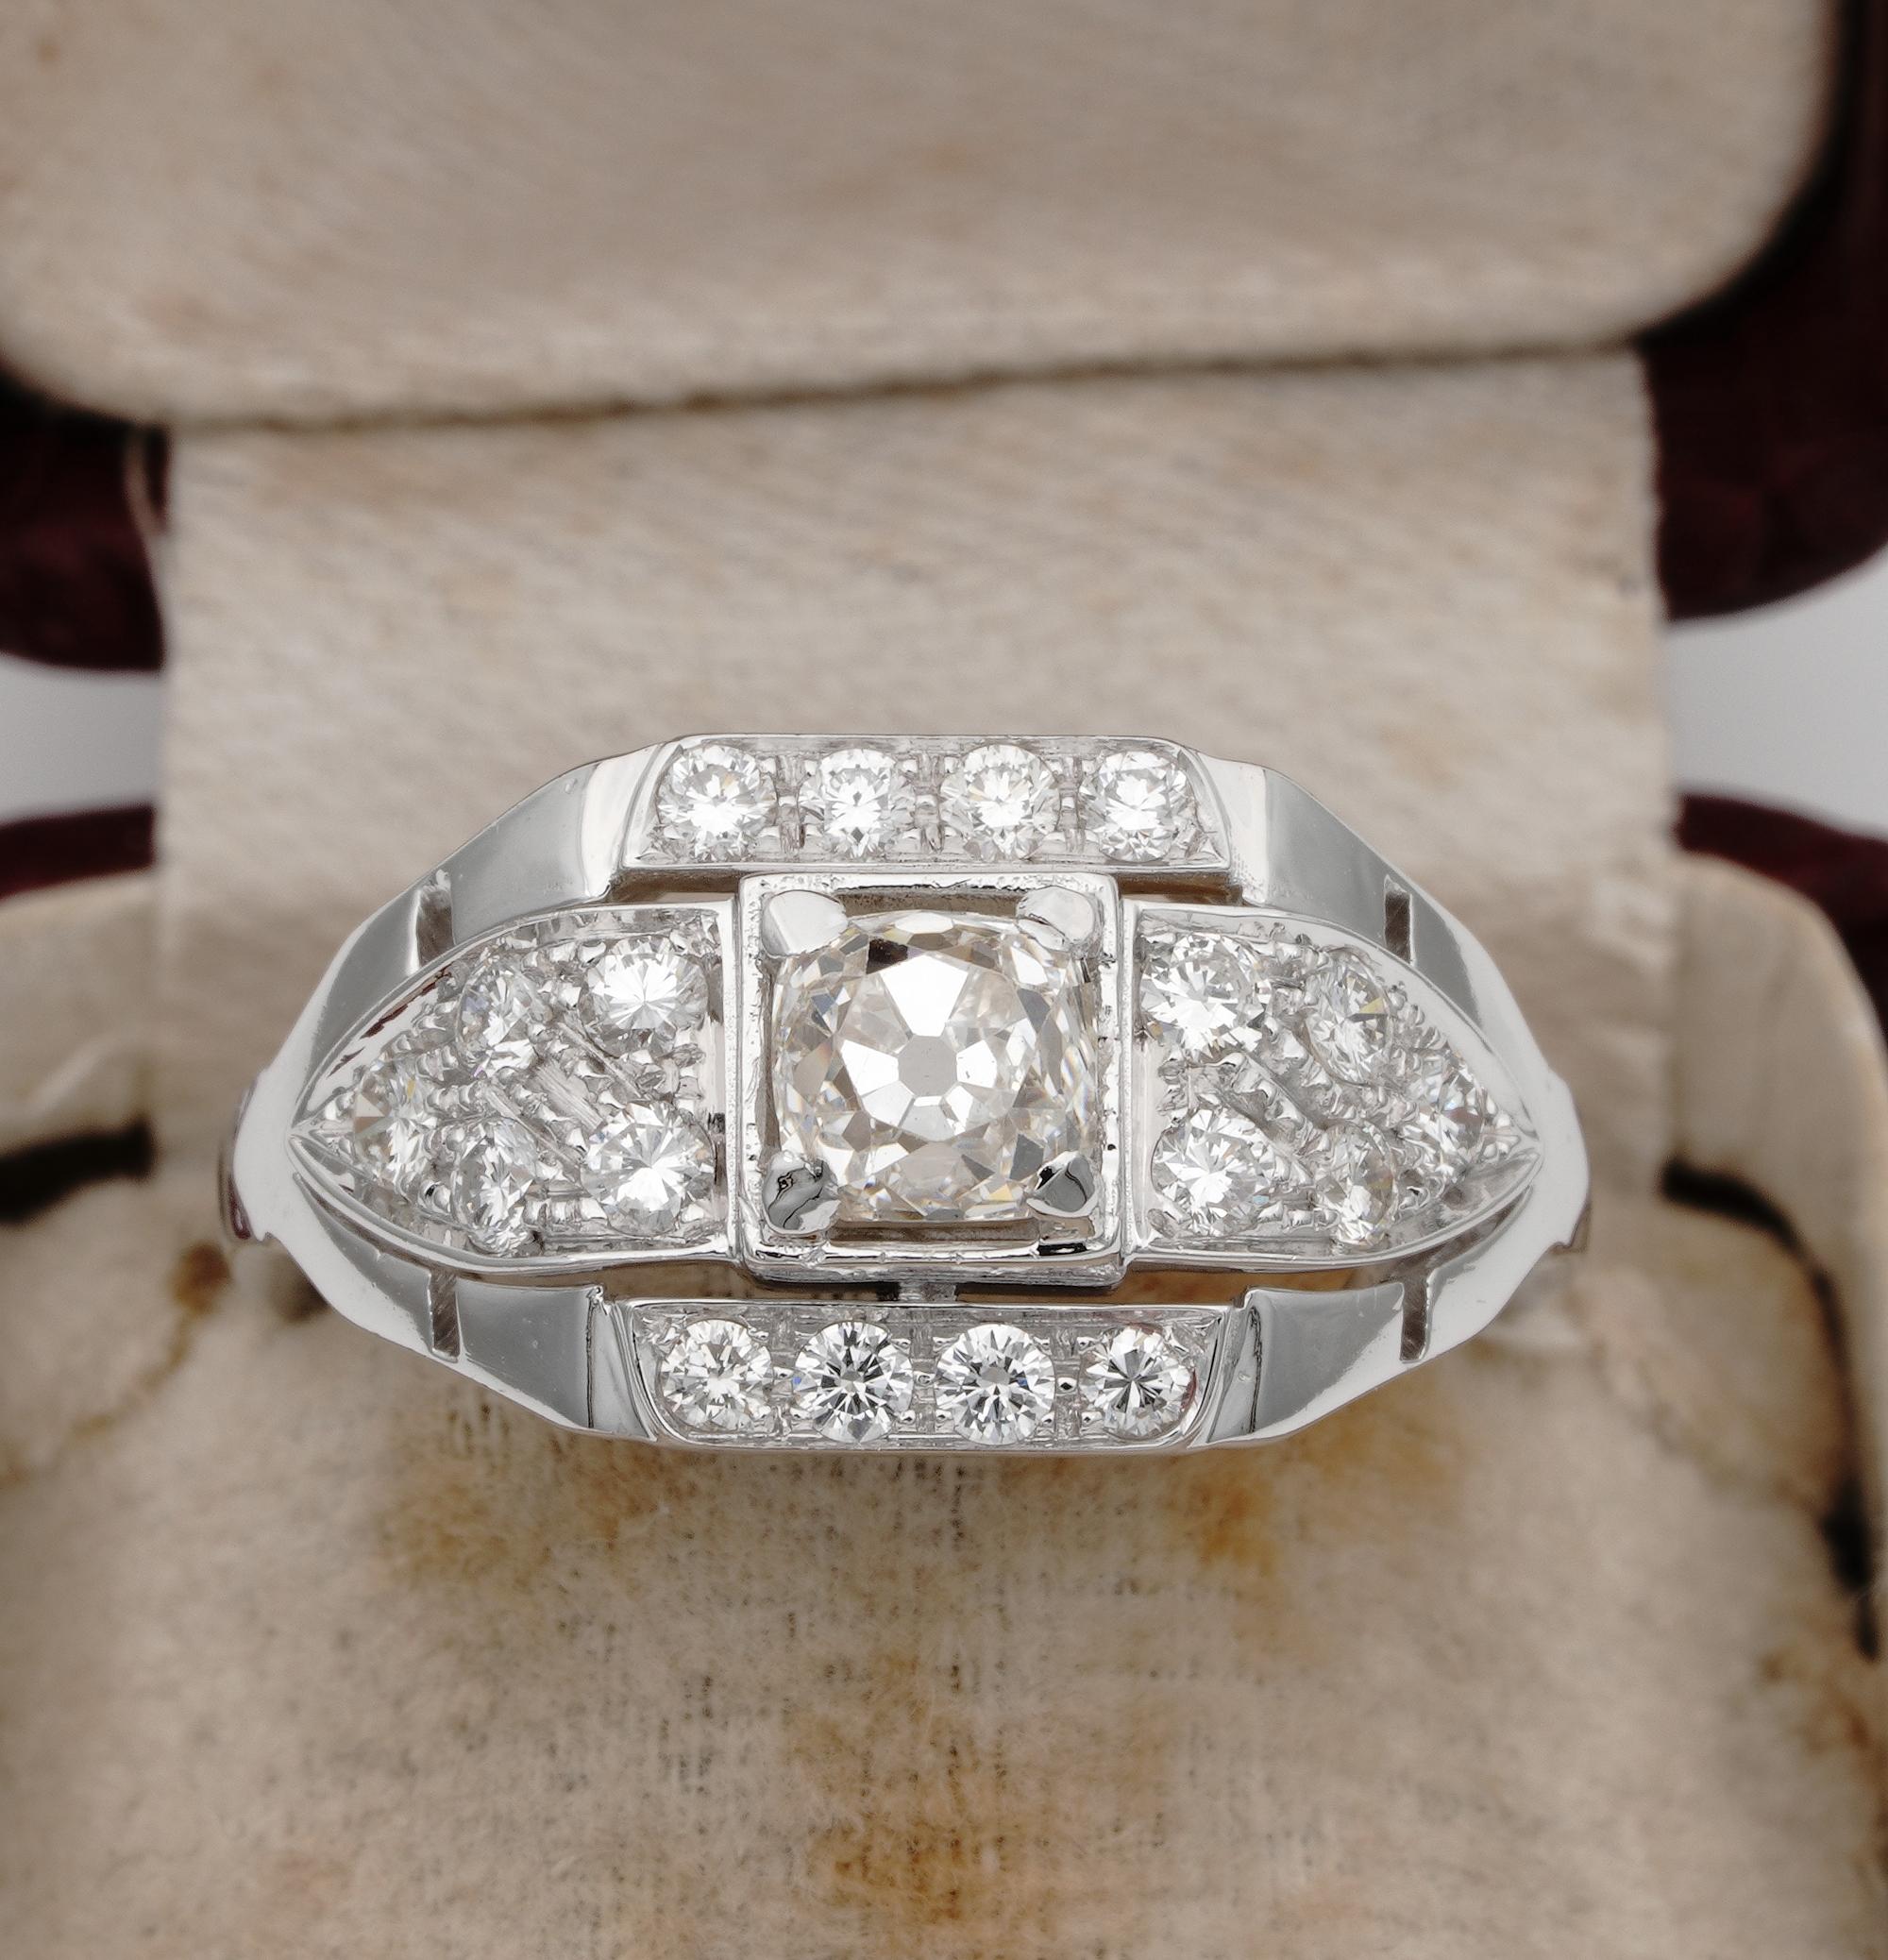  Impressed in the time

A stunning late Art Deco ring - 1935 ca
Entirely hand crafted of solid 18 KT white gold marked with assay and maker punch – Italian origin
Diamonds ablaze giving life to the stunning crown
A centre . 85 CT old mine cut chunky